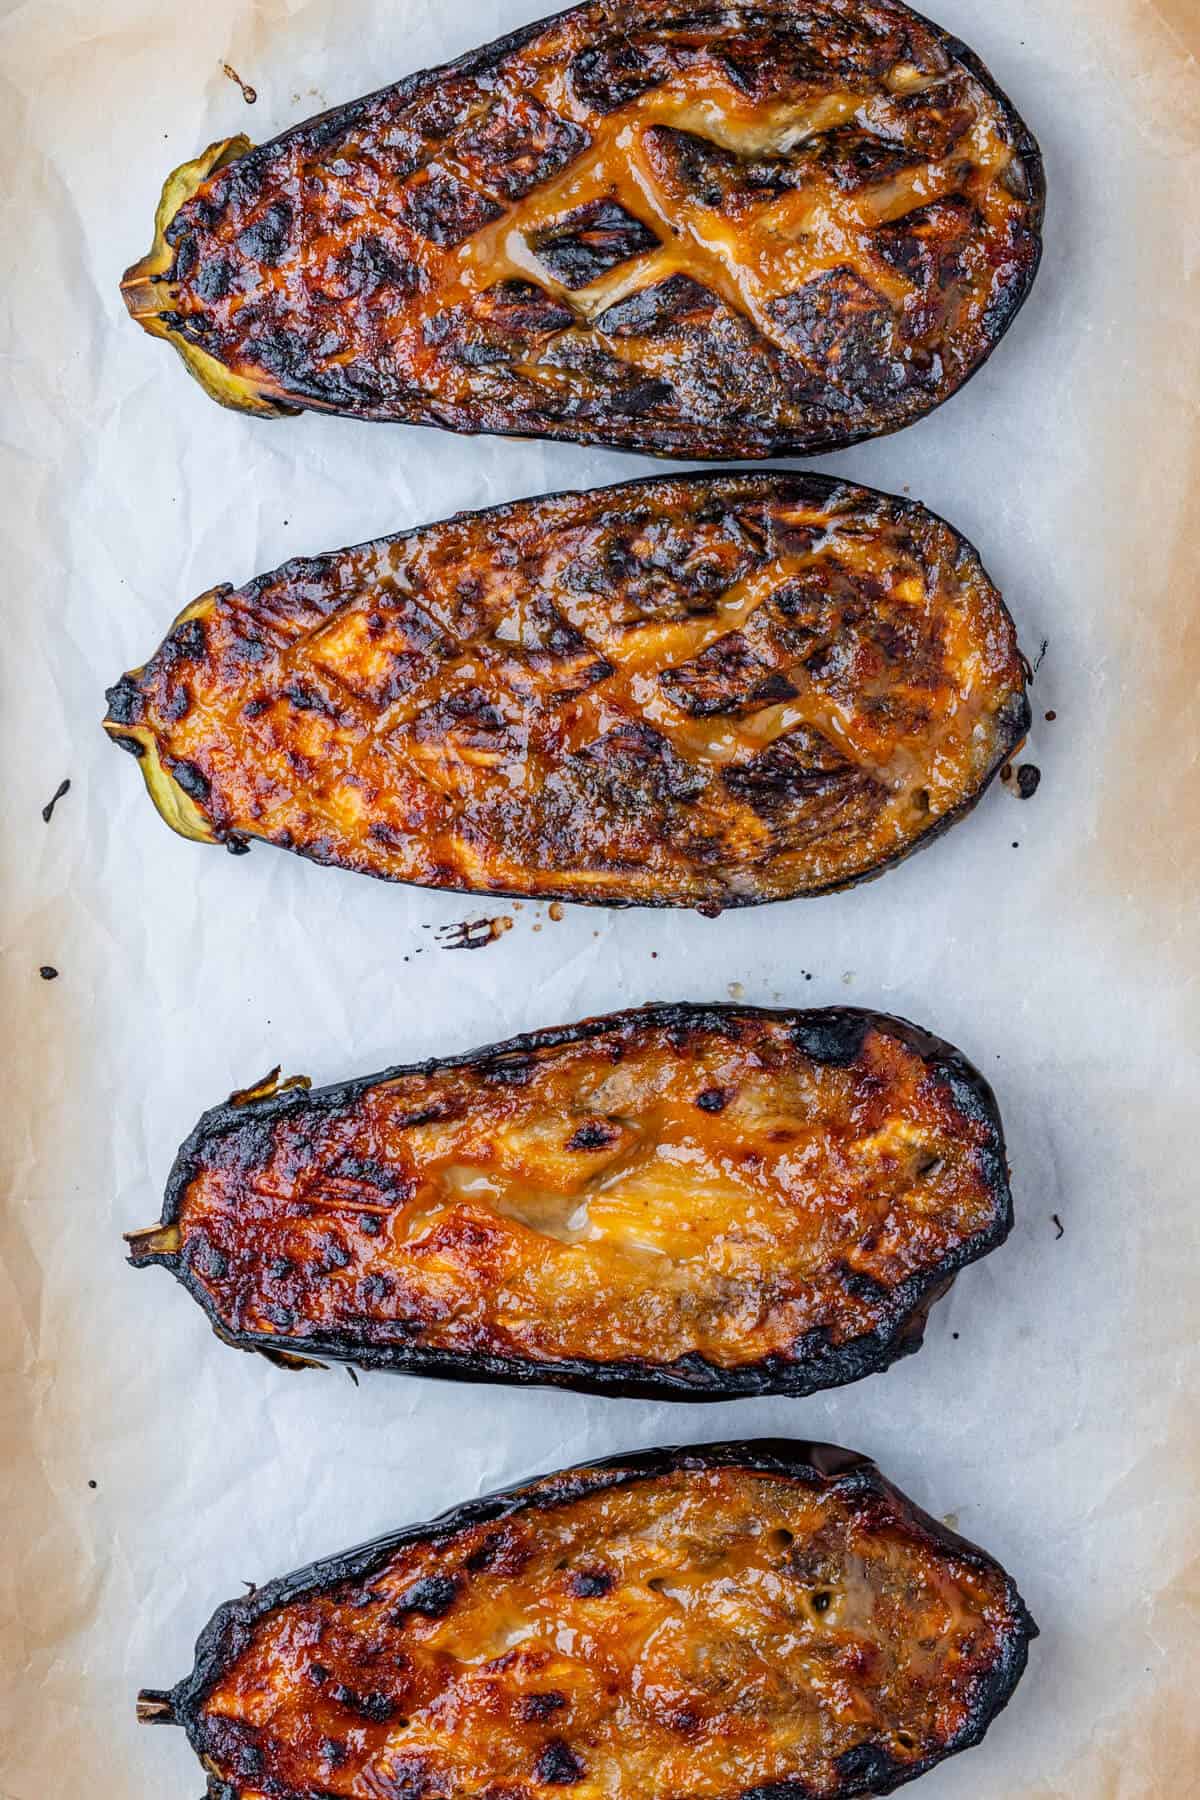 Cooked eggplants on a baking tray